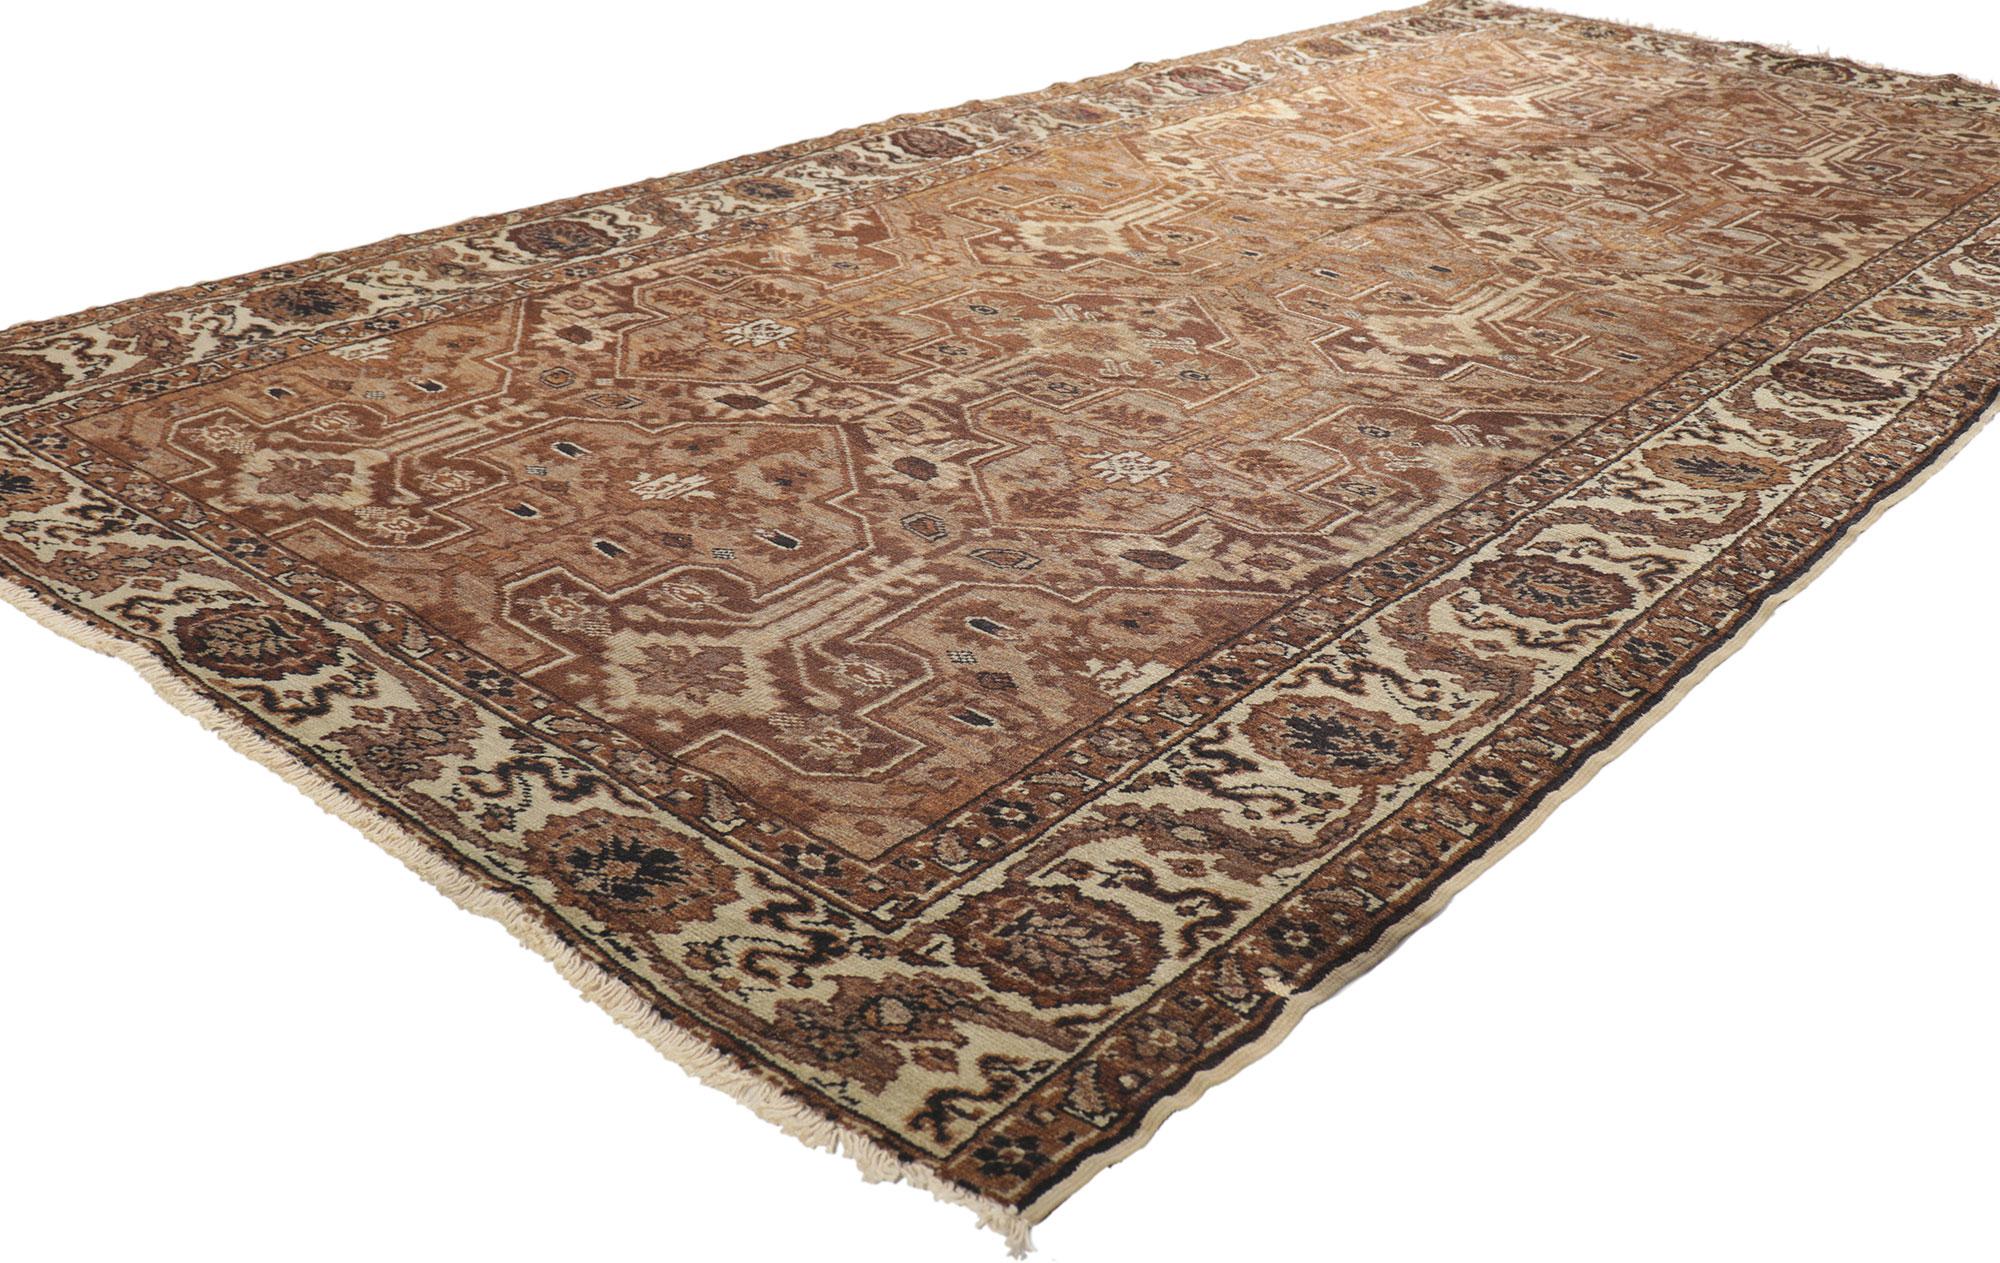 73808 Vintage Turkish Sivas Rug, 04'04 x 08'02.
With its neutral color palette, straight and curved lines, this hand knotted wool vintage Turkish Sivas runner beautifully embodies William and Mary style with a modern twist. It features repeating